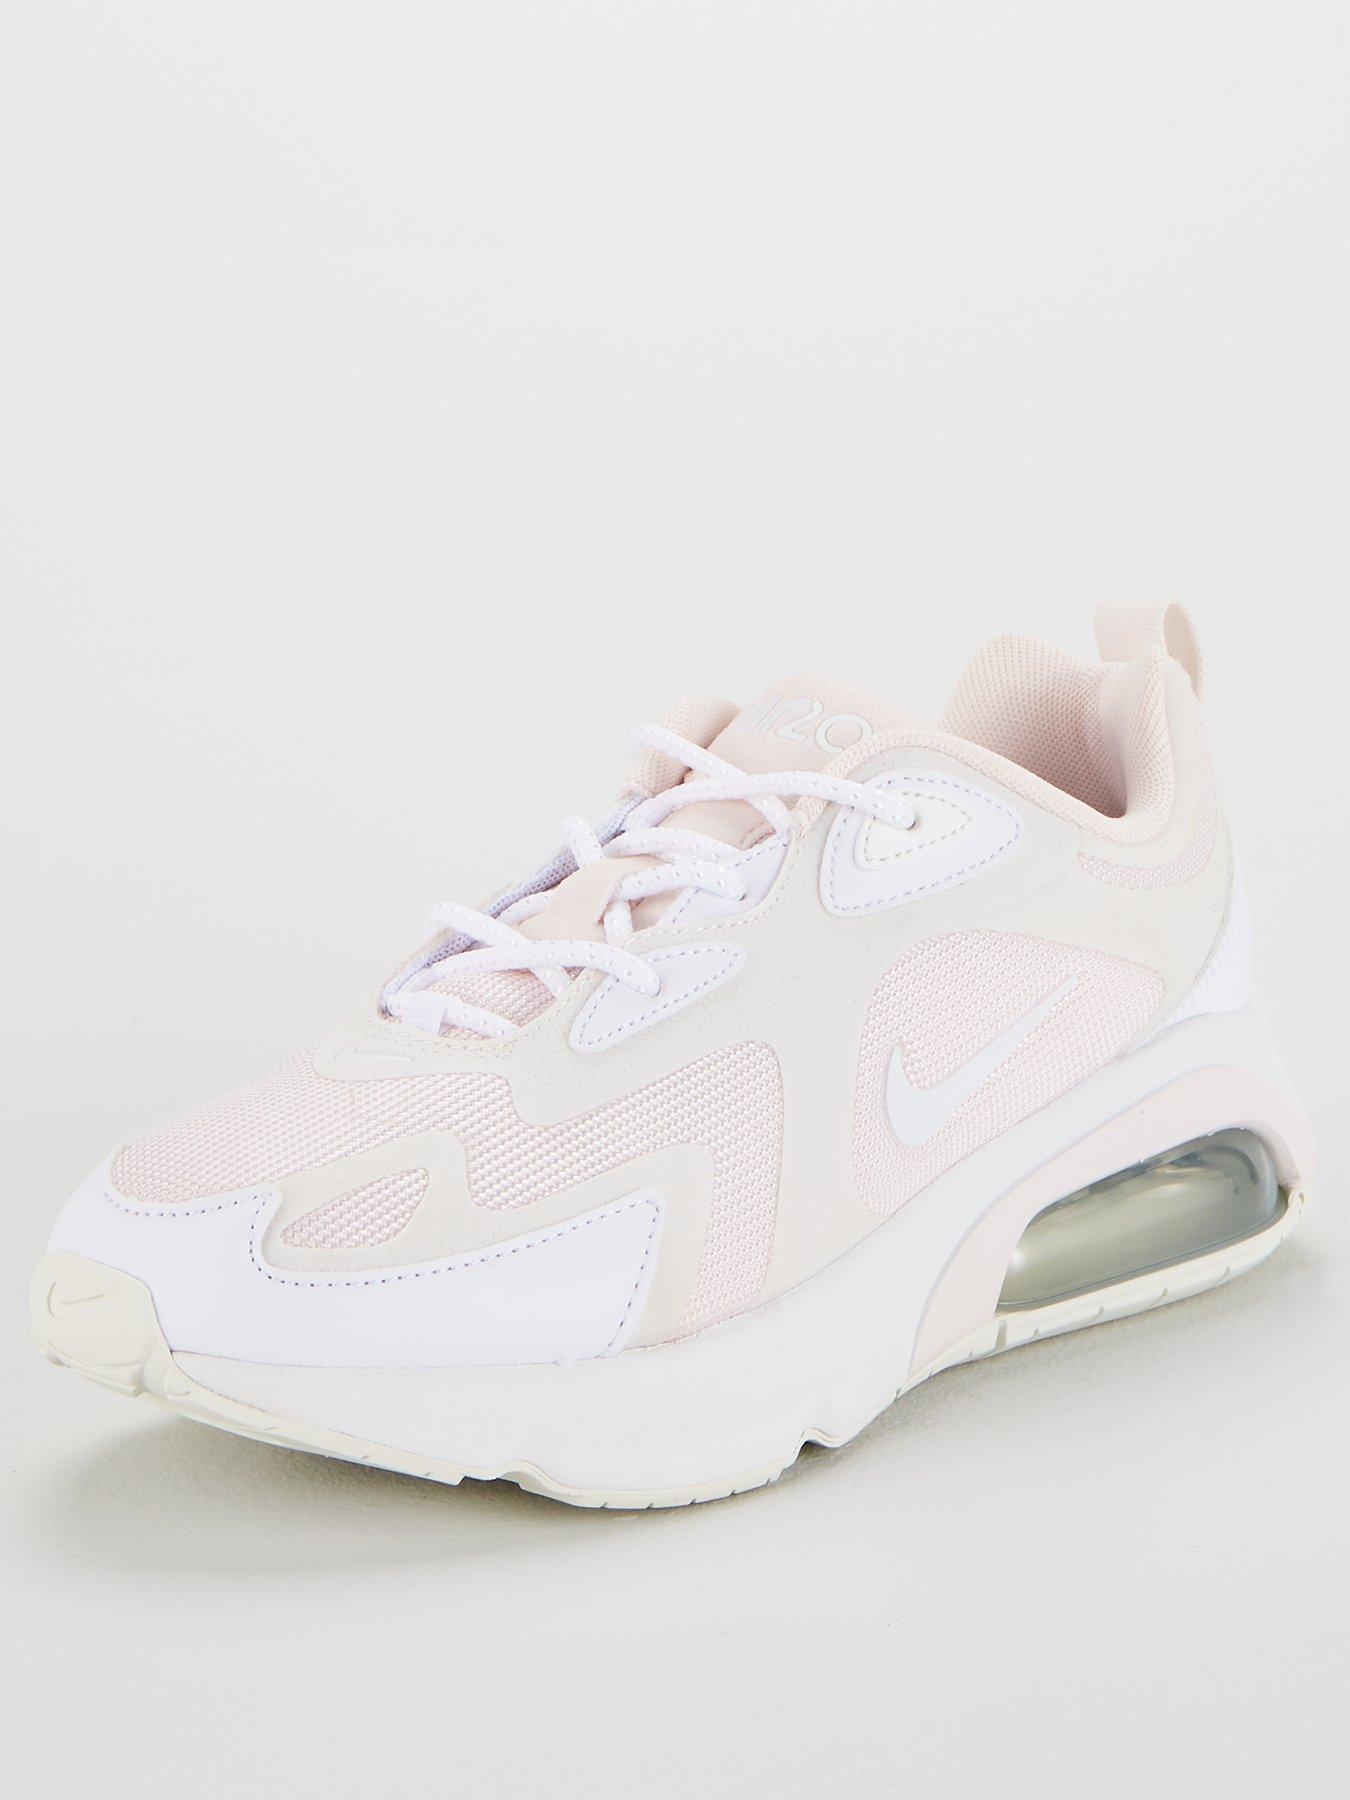 nike white and pink air max 200 trainers